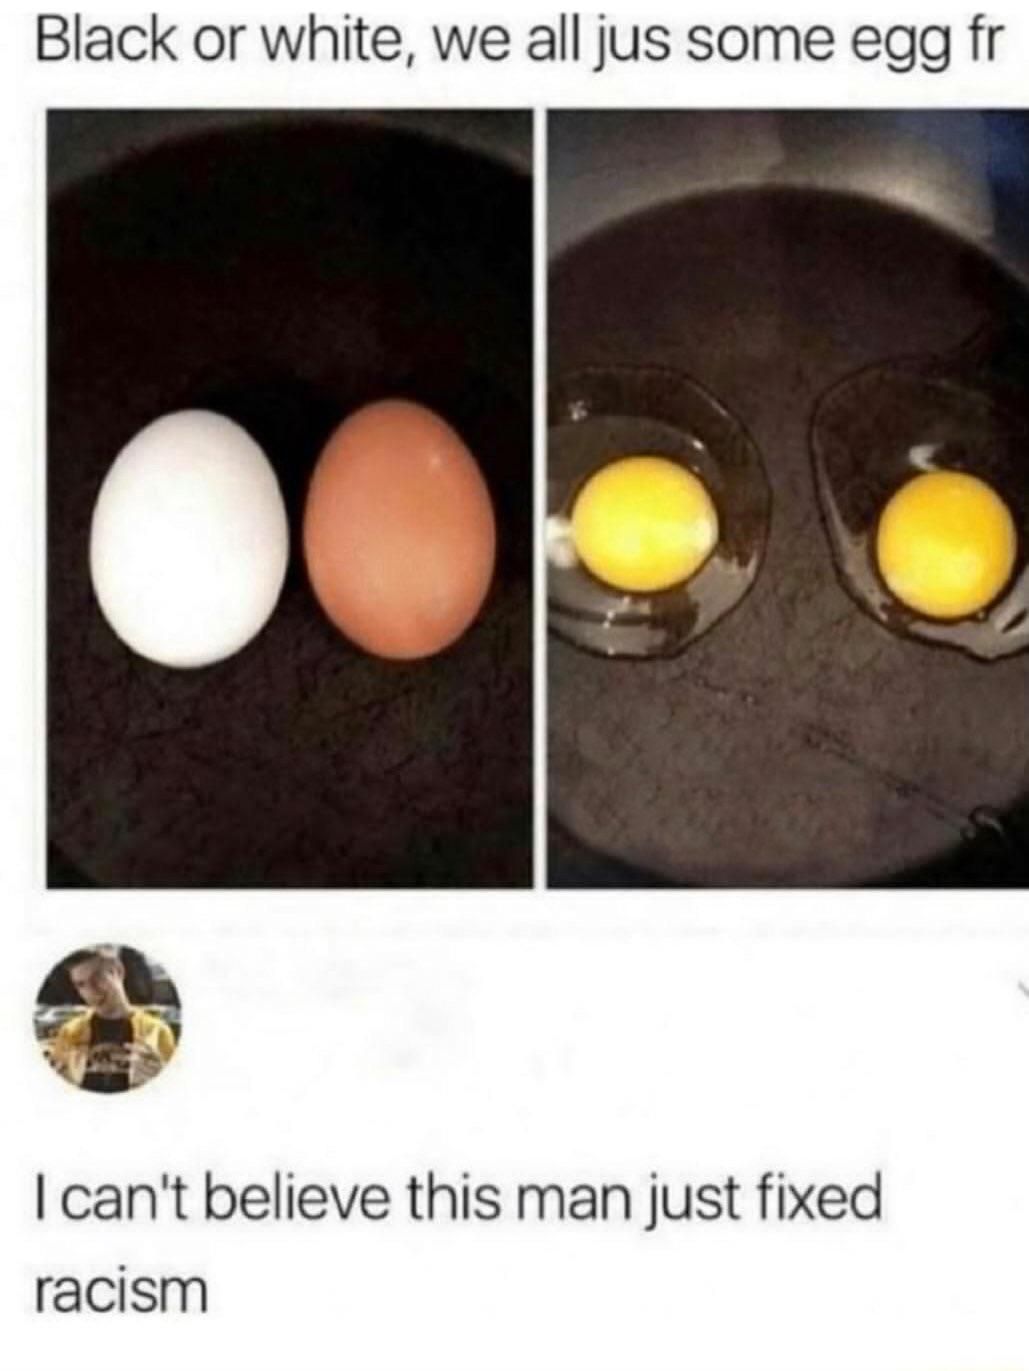 We all jus some egg